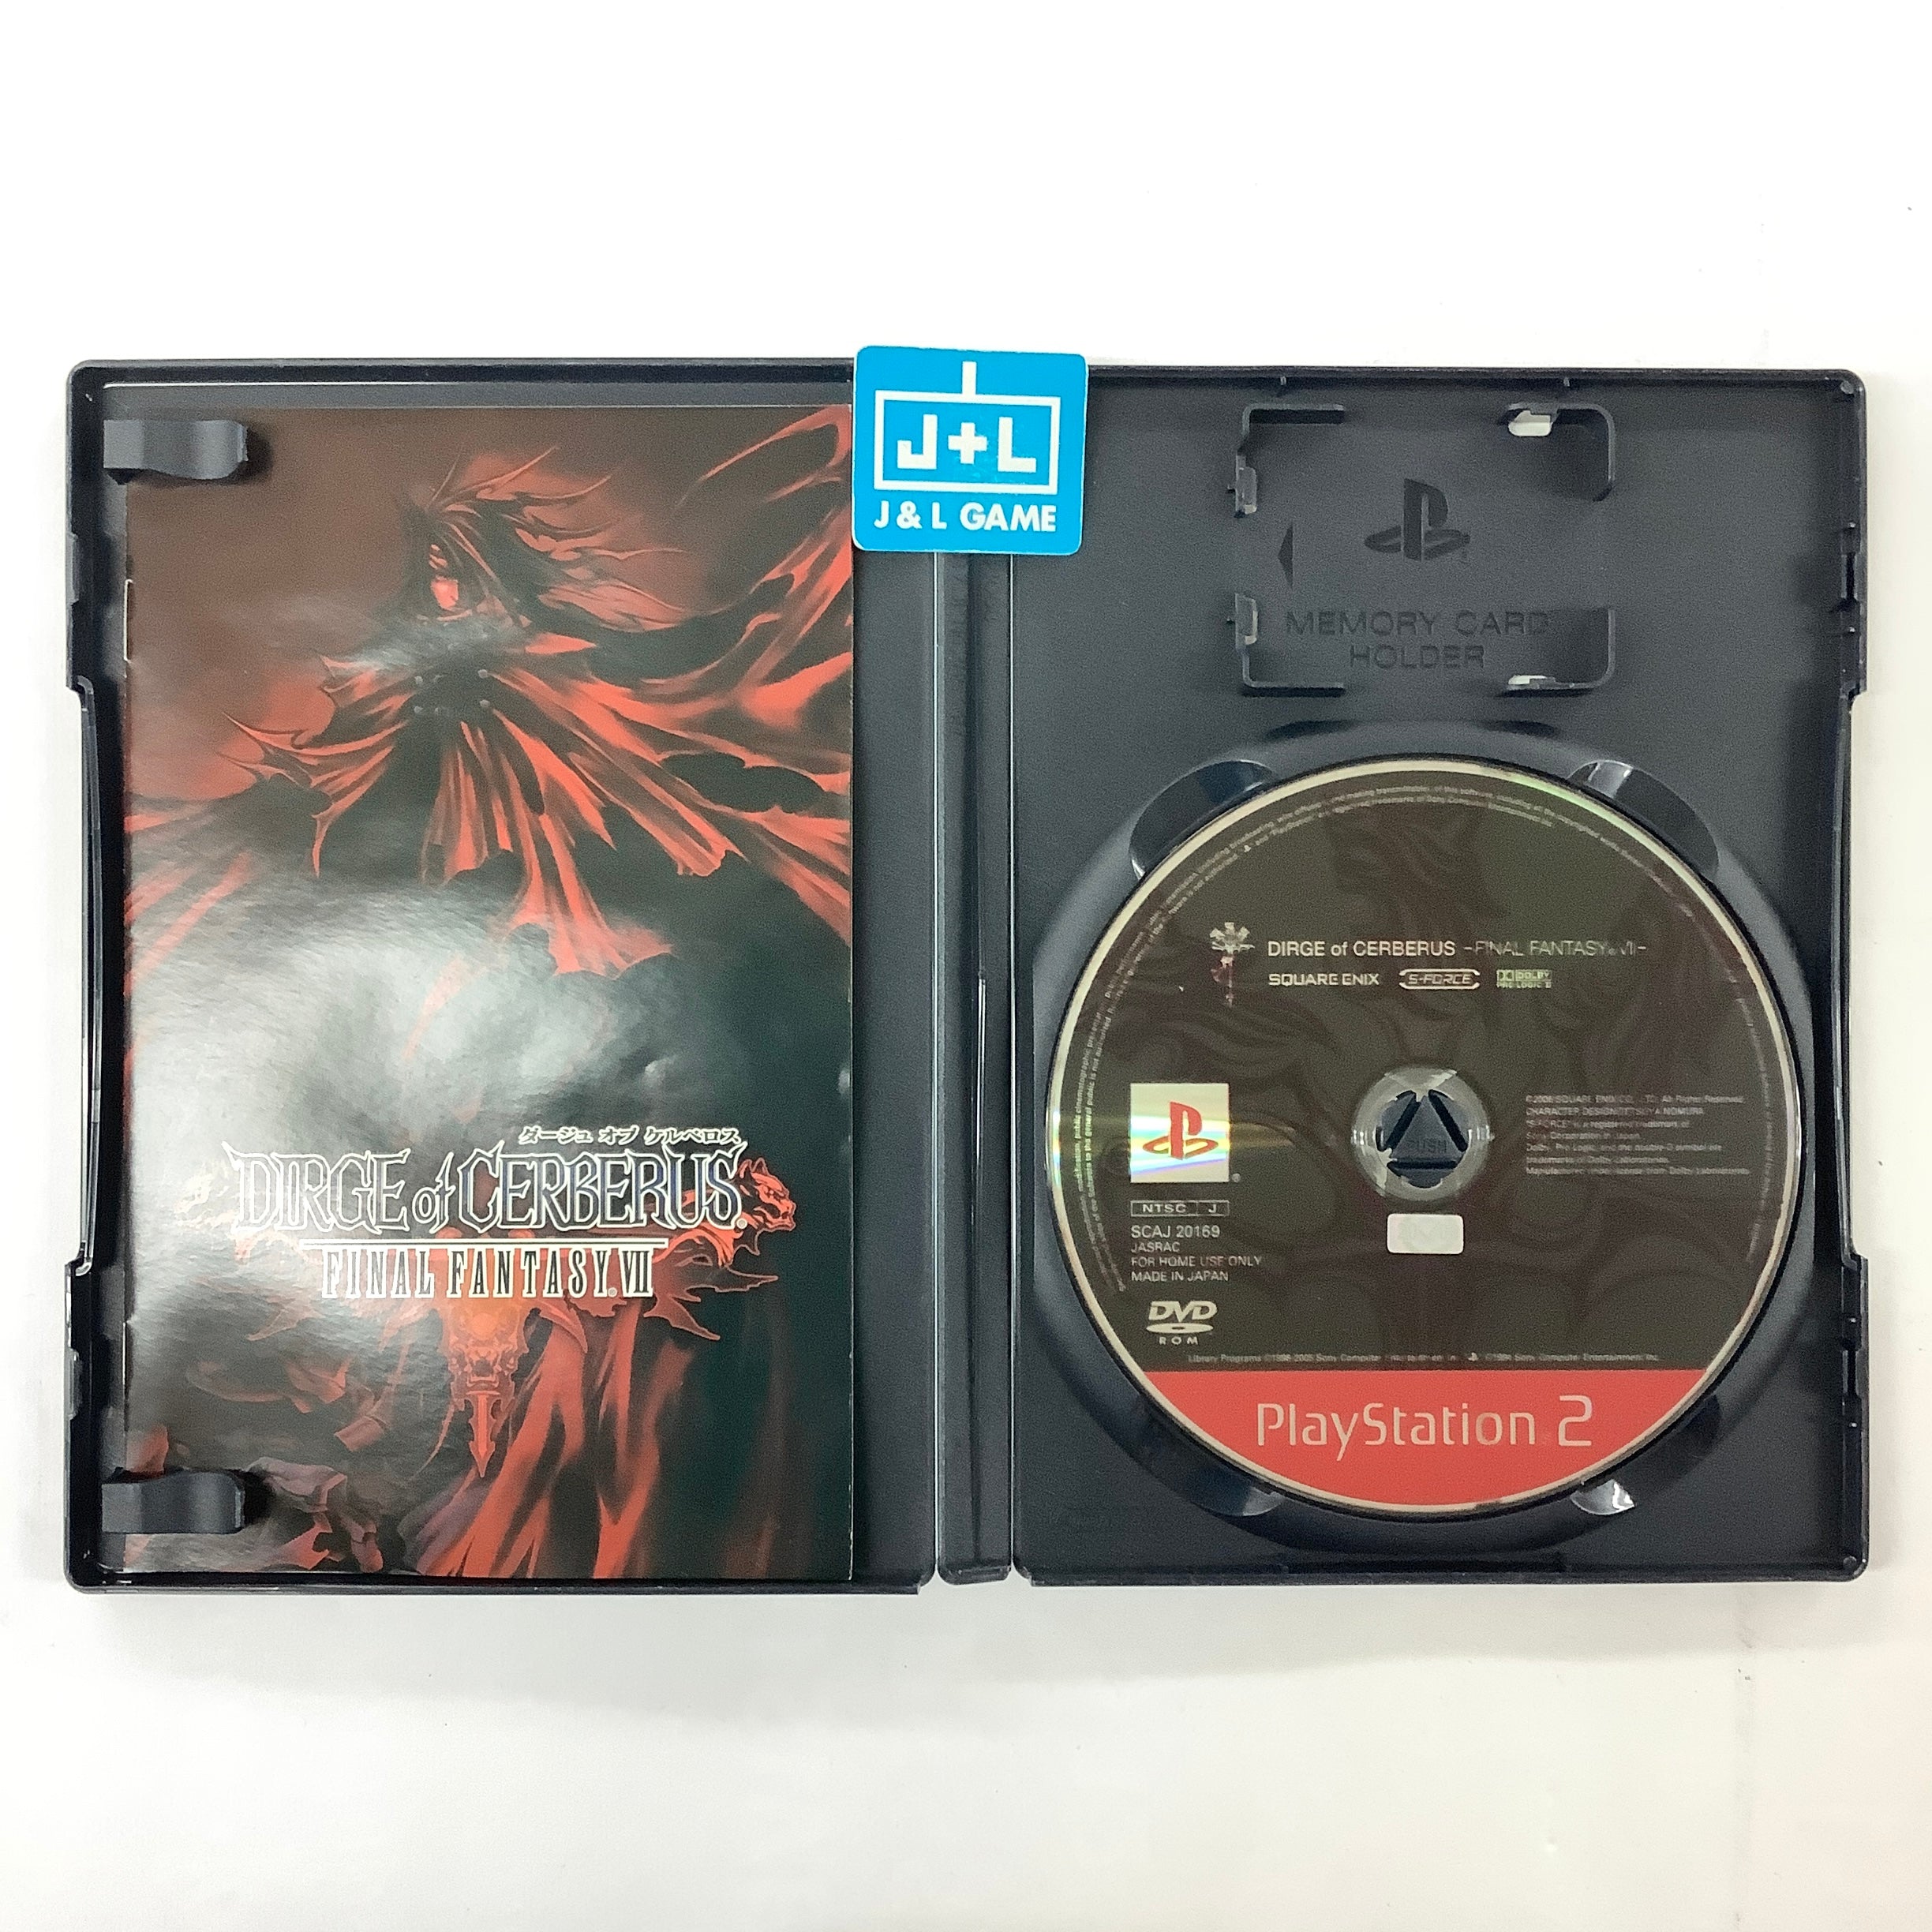 Dirge of Cerberus: Final Fantasy VII - (PS2) PlayStation 2 [Pre-Owned] (Asia Import) Video Games Square Enix   